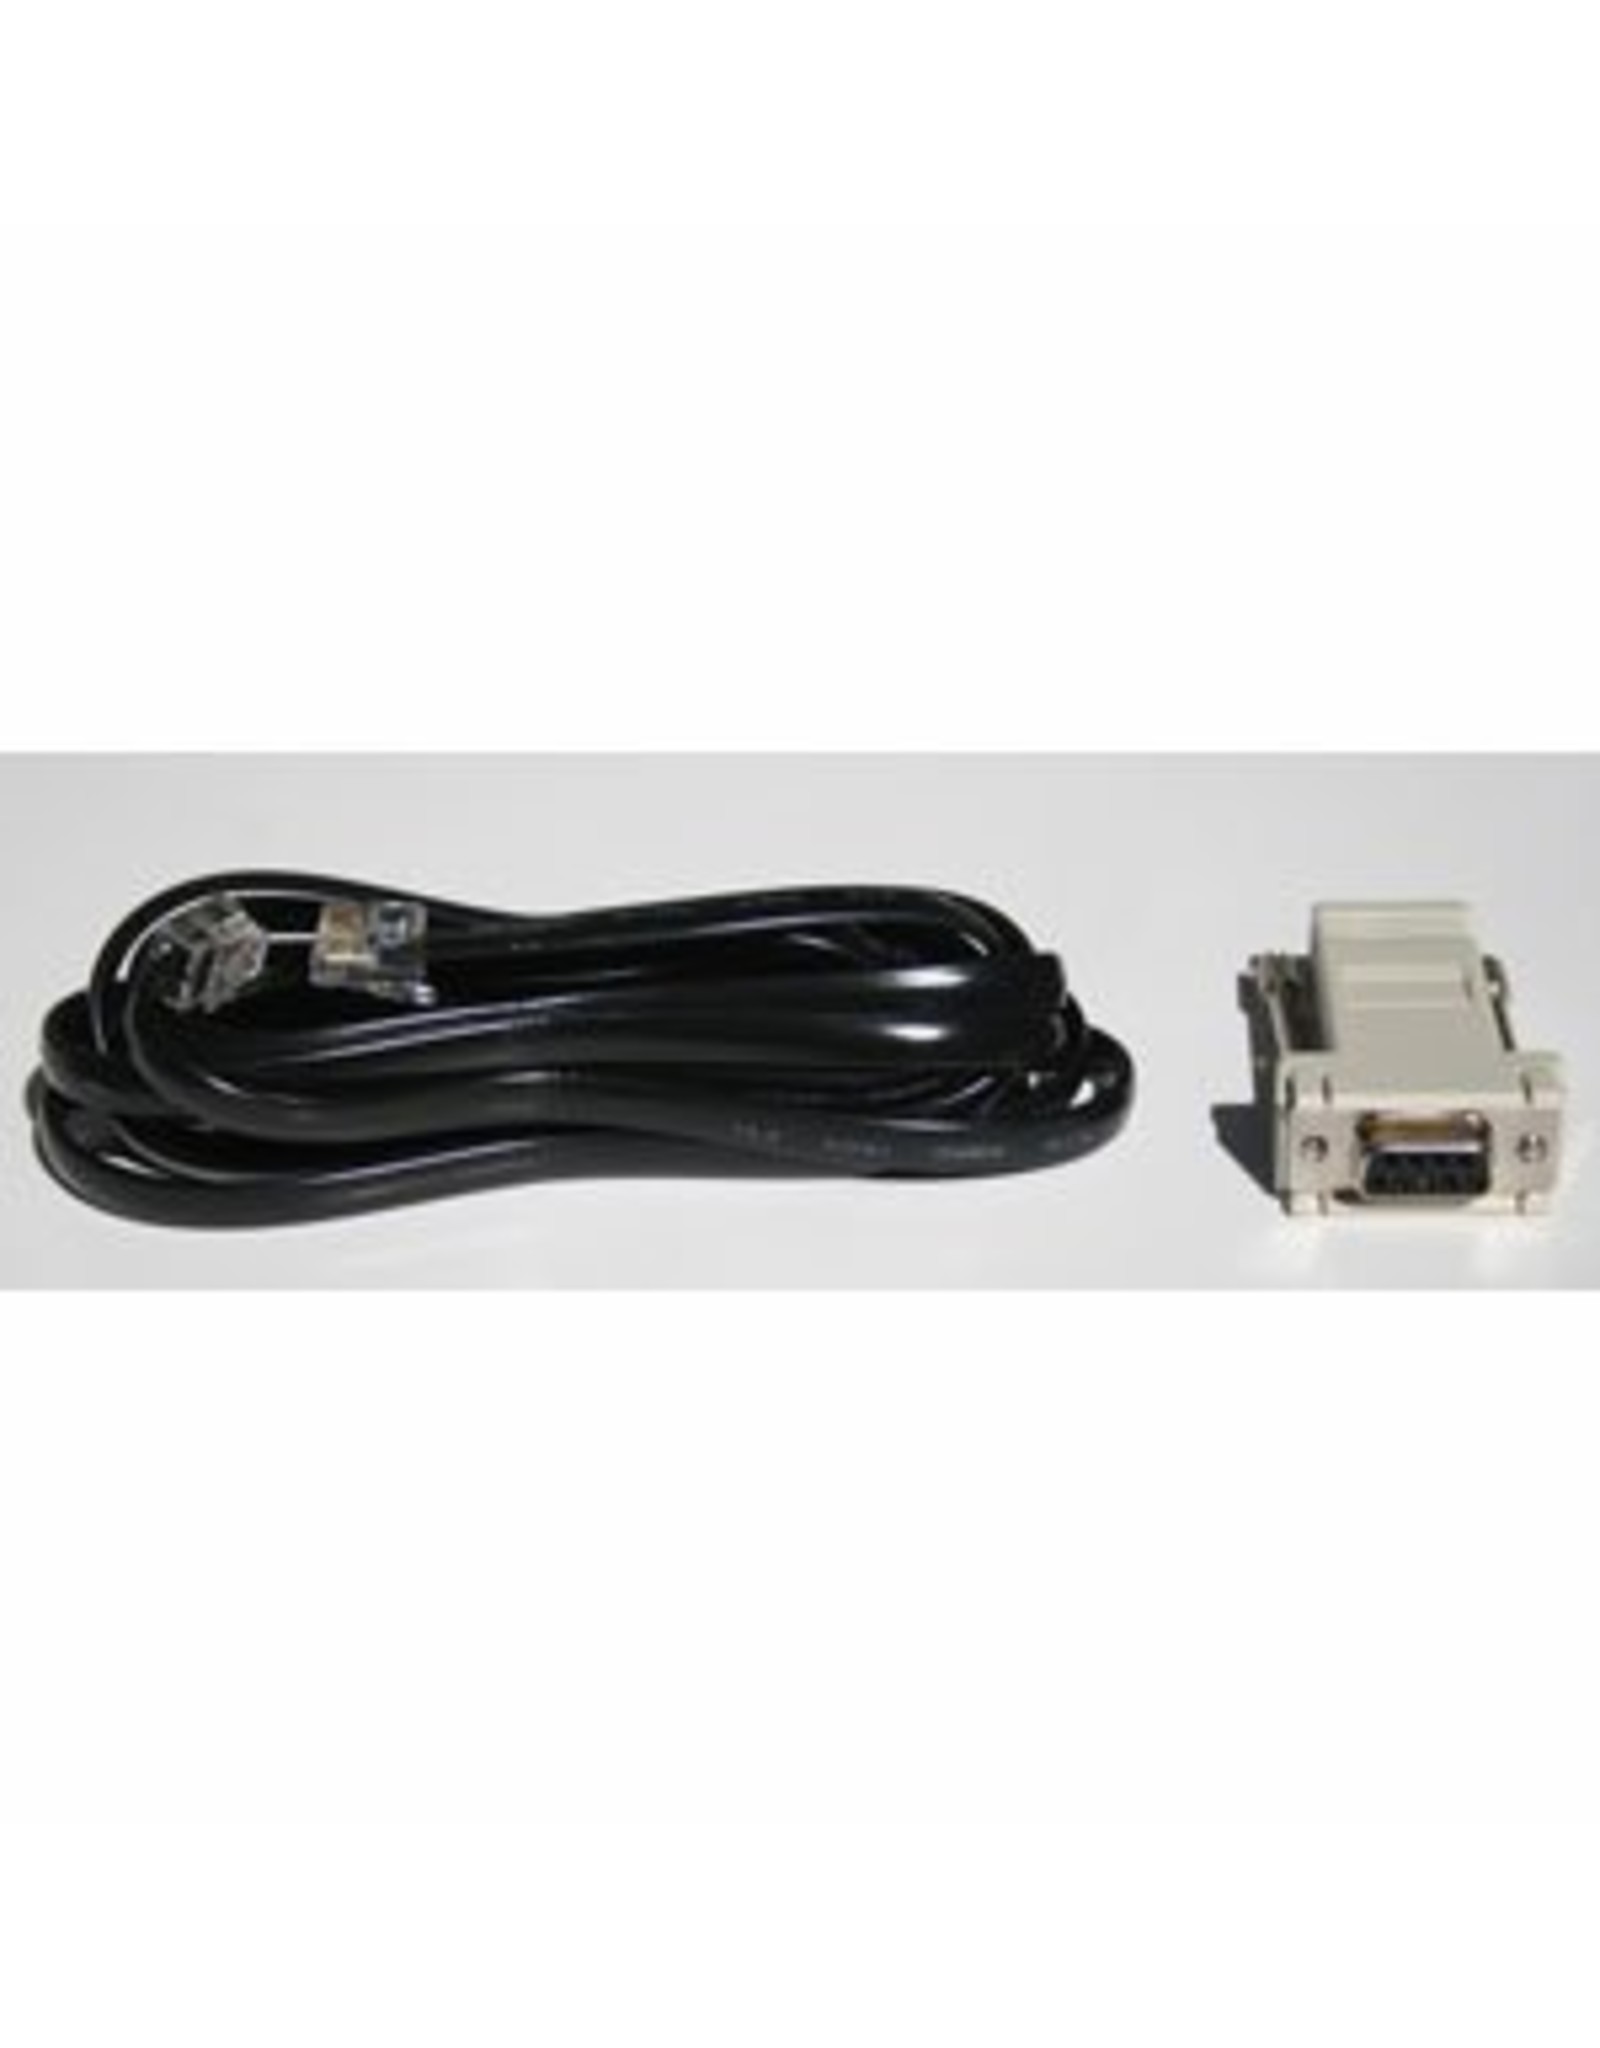 Meade Meade #507 Cable Connector Kit for Meade LX200-ACF